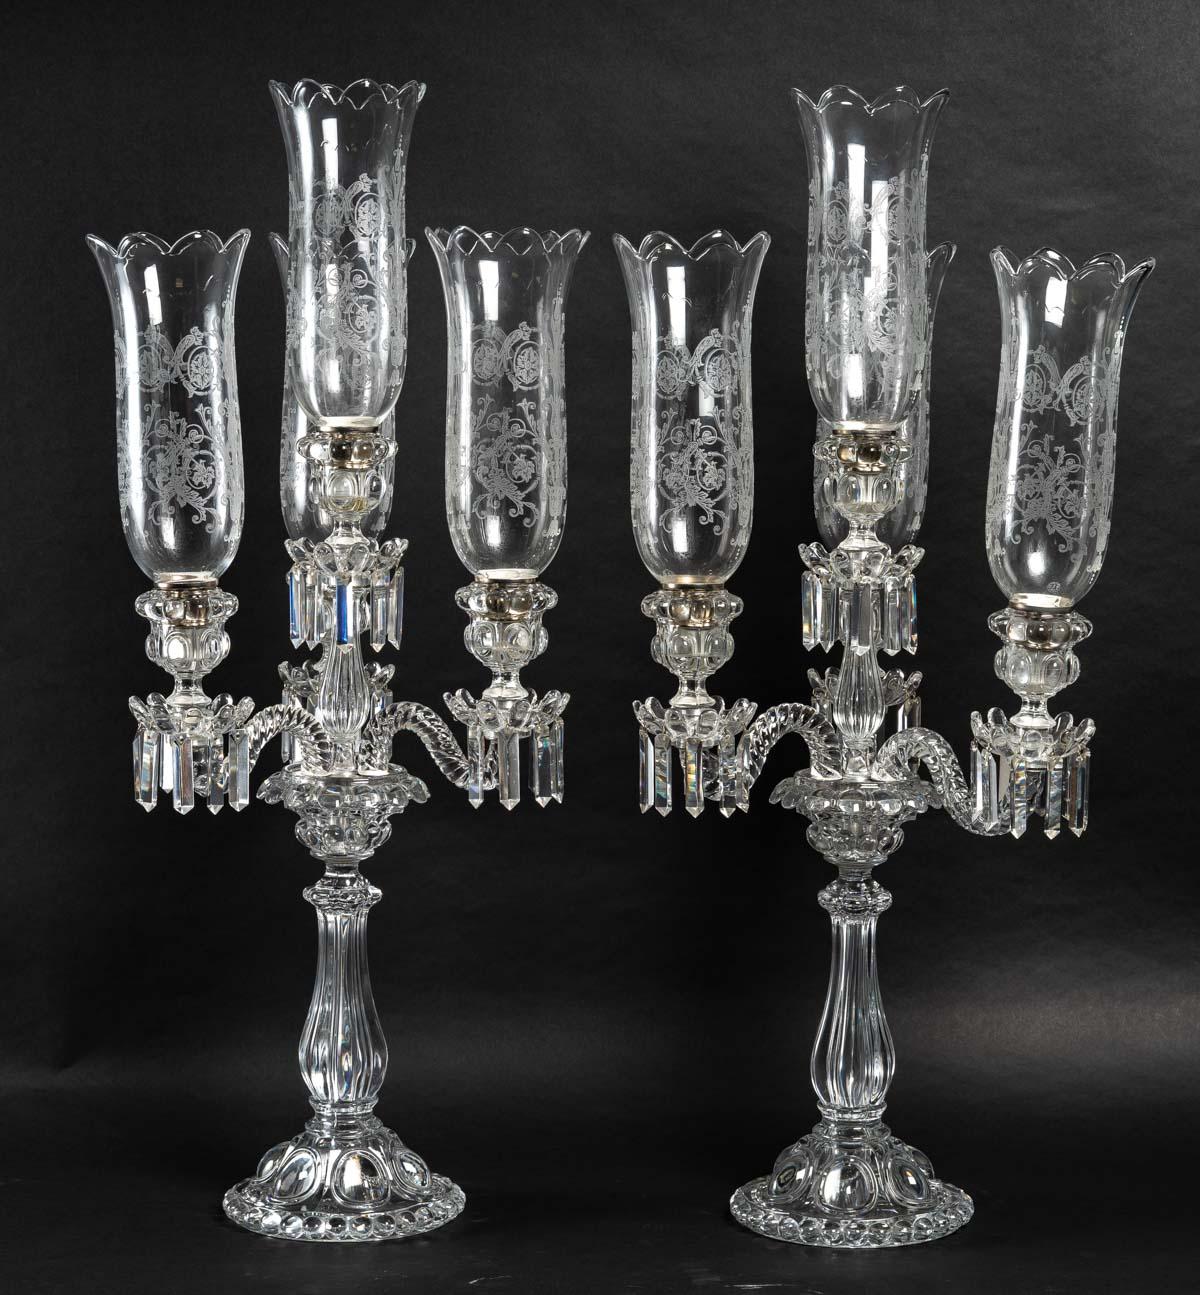 French Pair of Candelabras, Baccarat